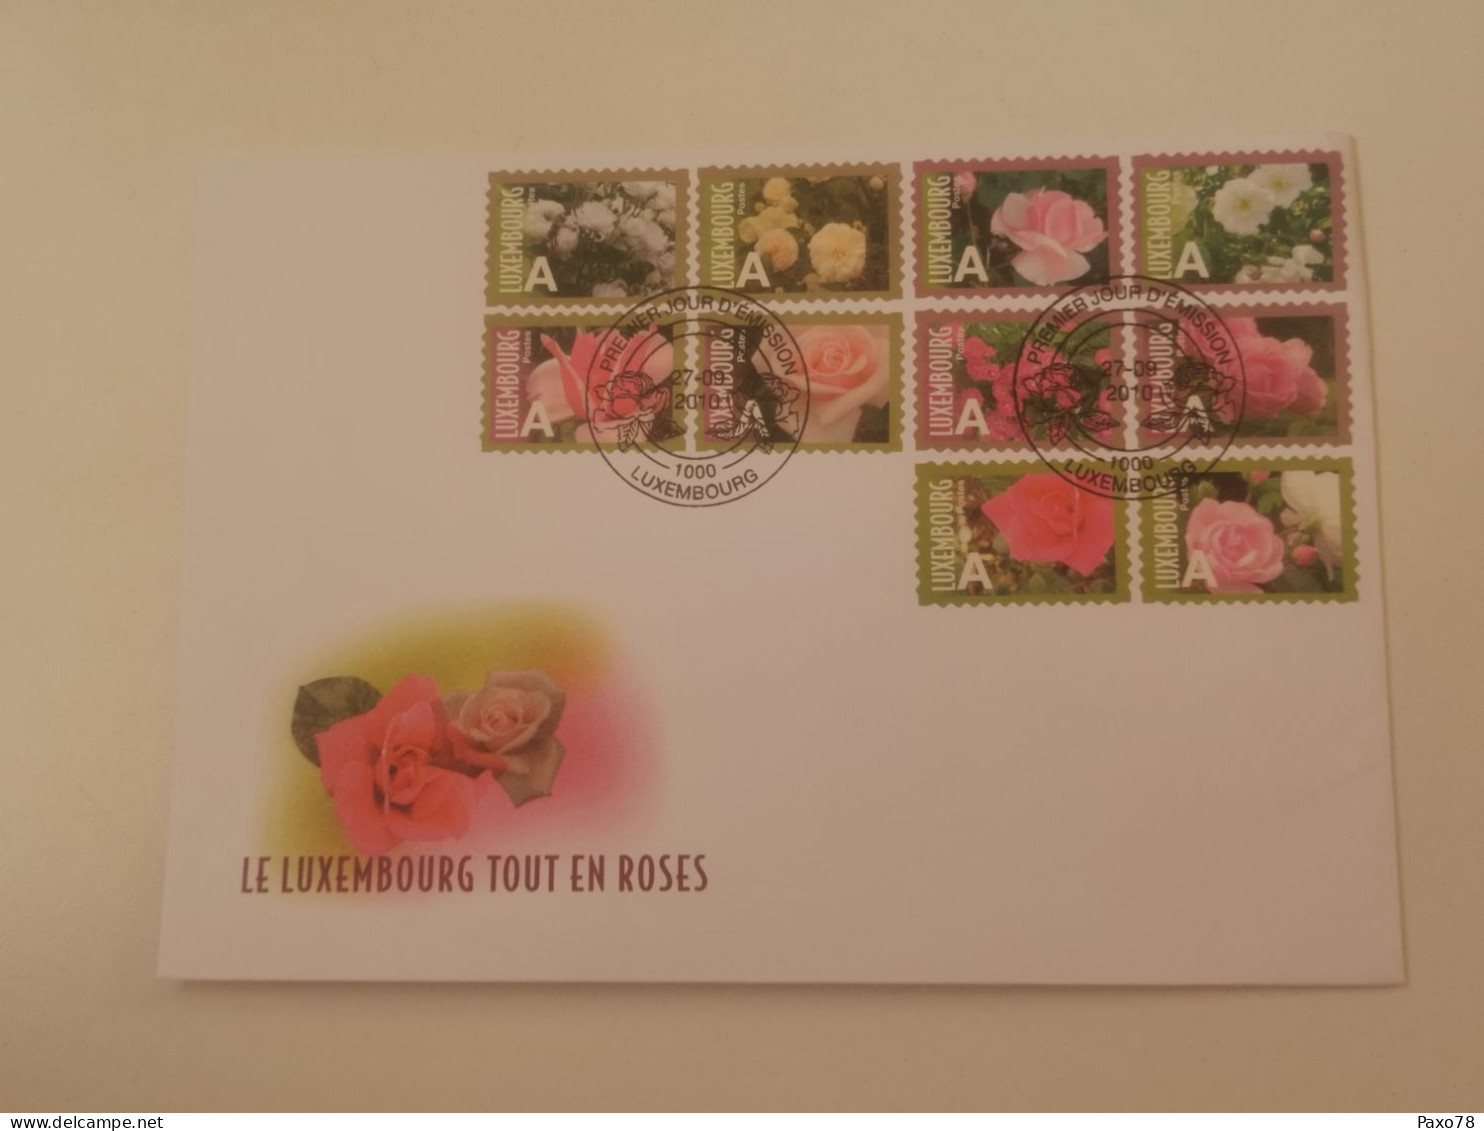 FDC Luxembourg, Le Luxembourg Tout En Roses 2010 - FDC